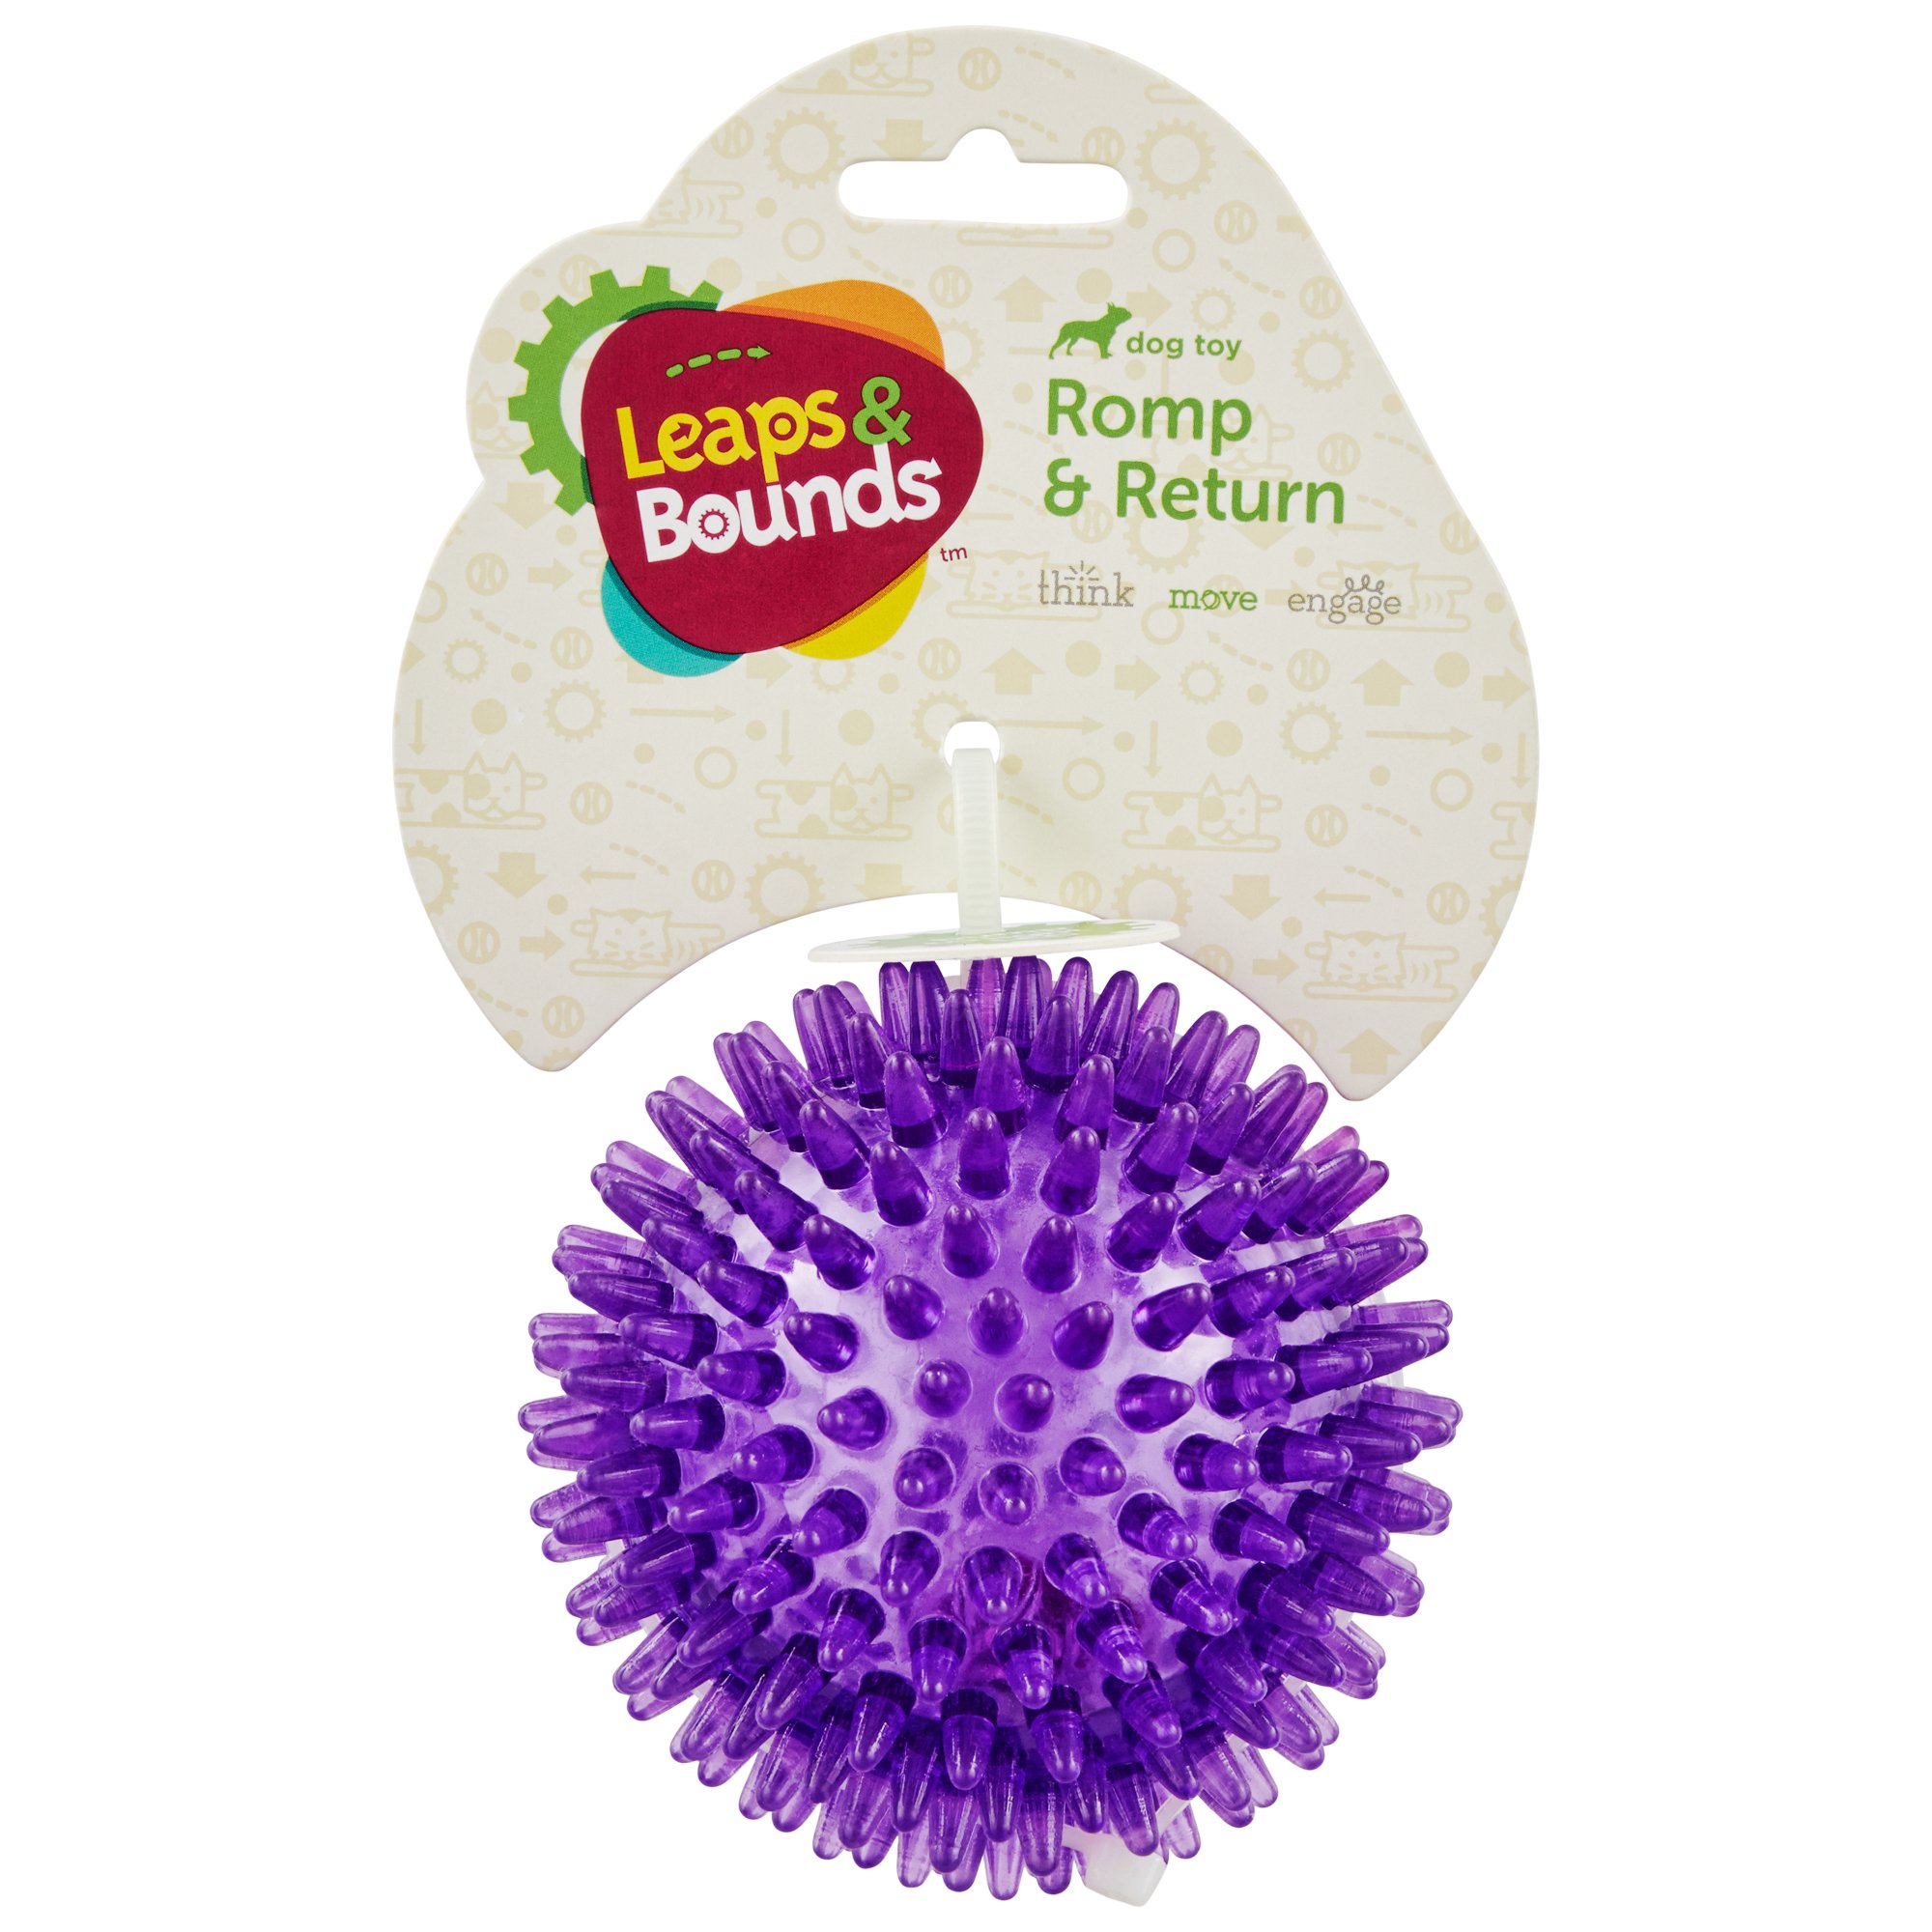 leaps and bounds dog toys